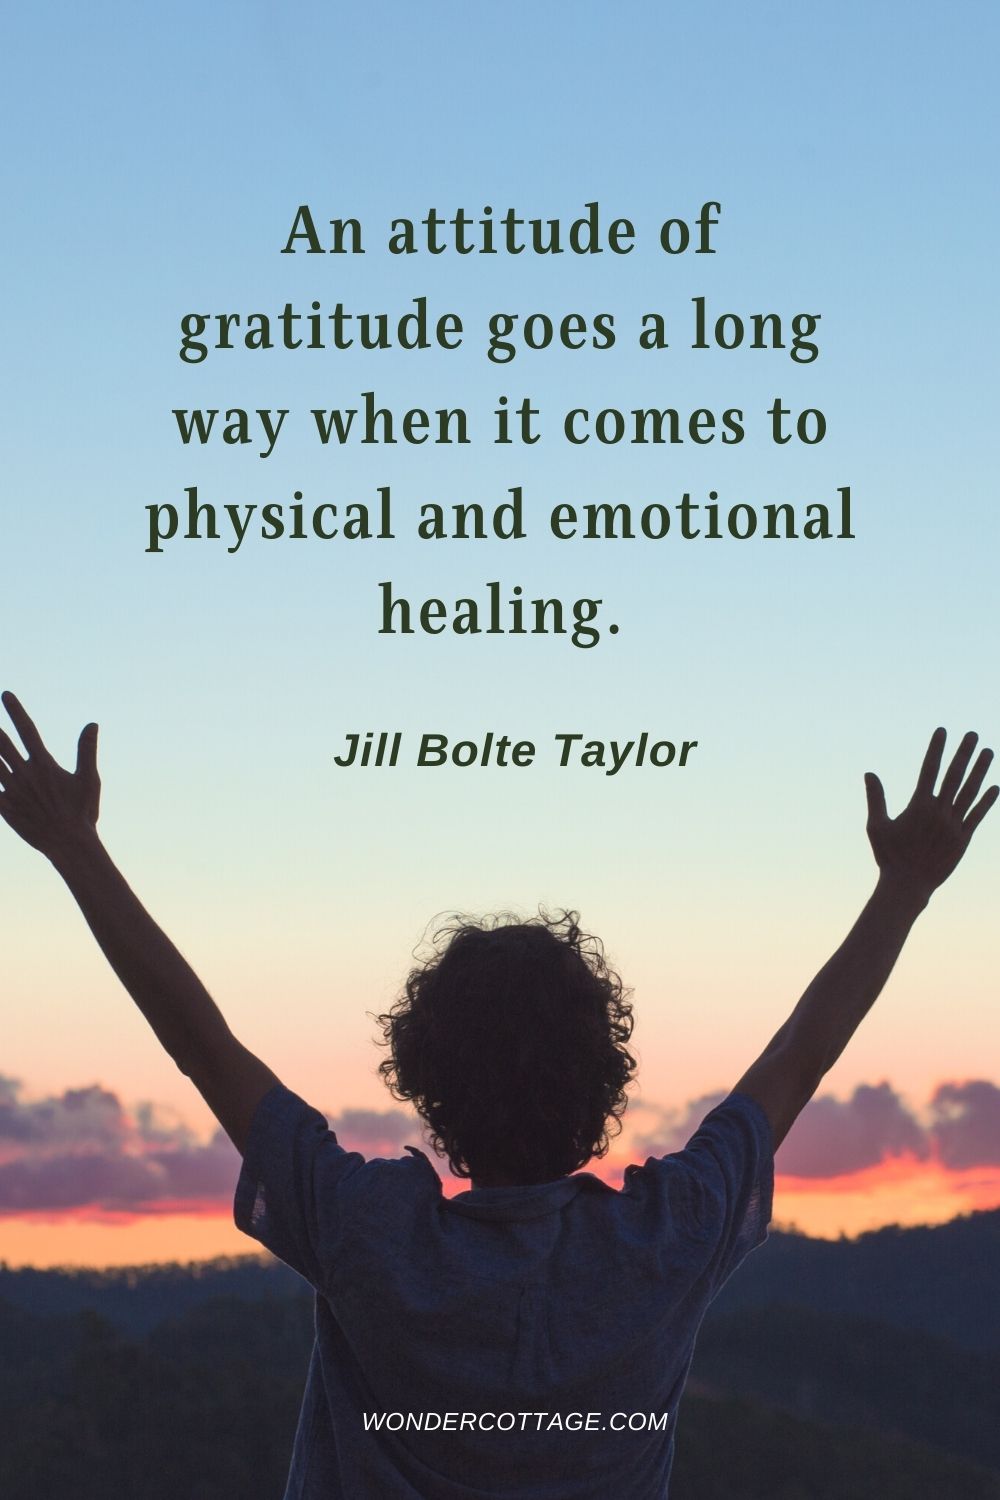 An attitude of gratitude goes a long way when it comes to physical and emotional healing. Jill Bolte Taylor